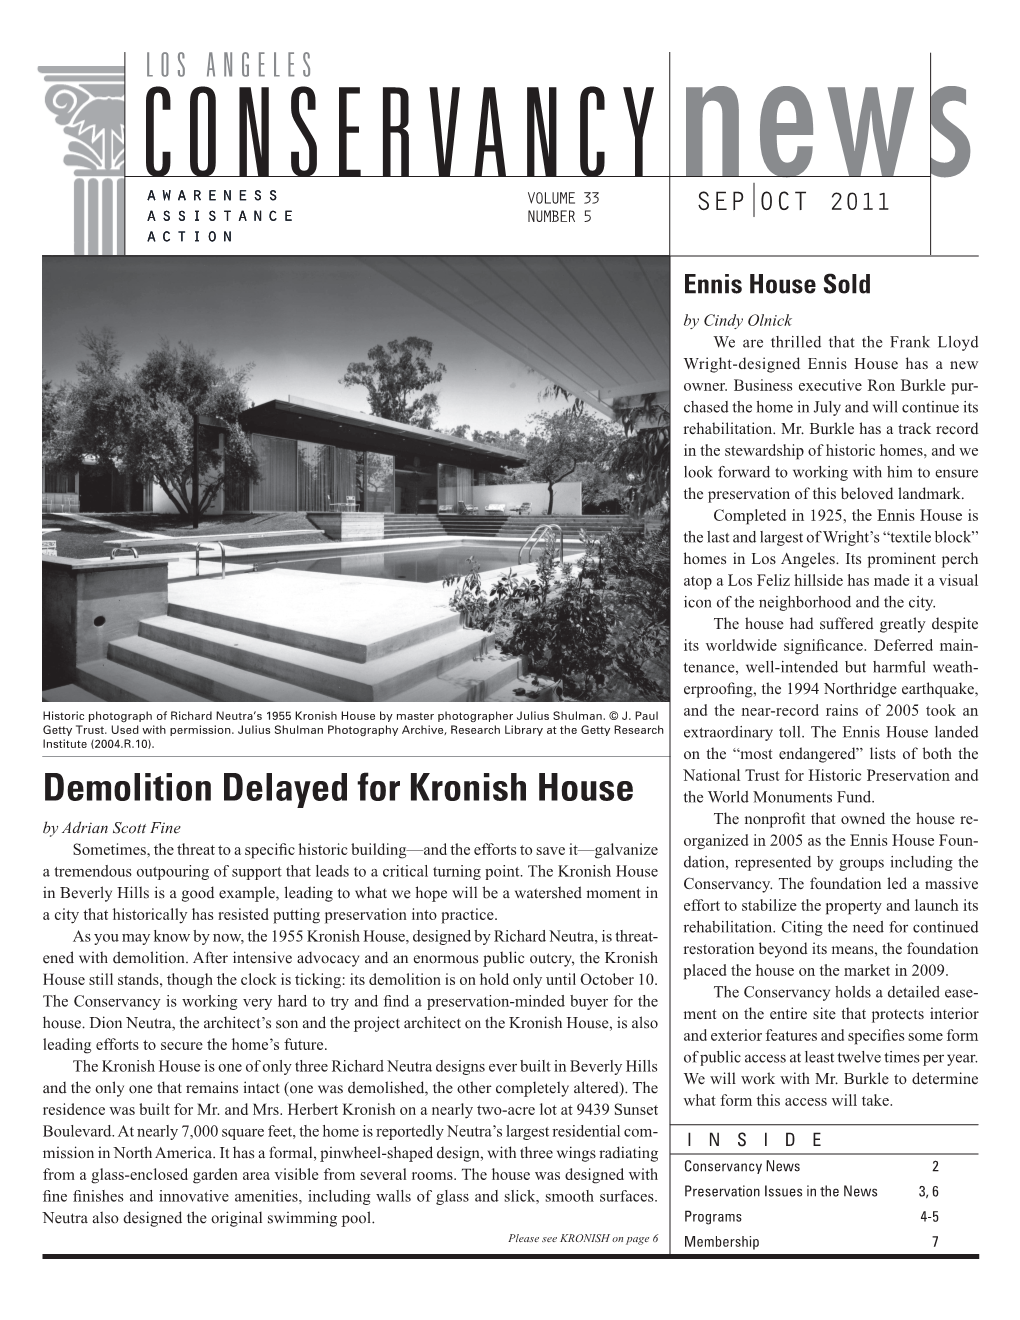 Demolition Delayed for Kronish House the World Monuments Fund